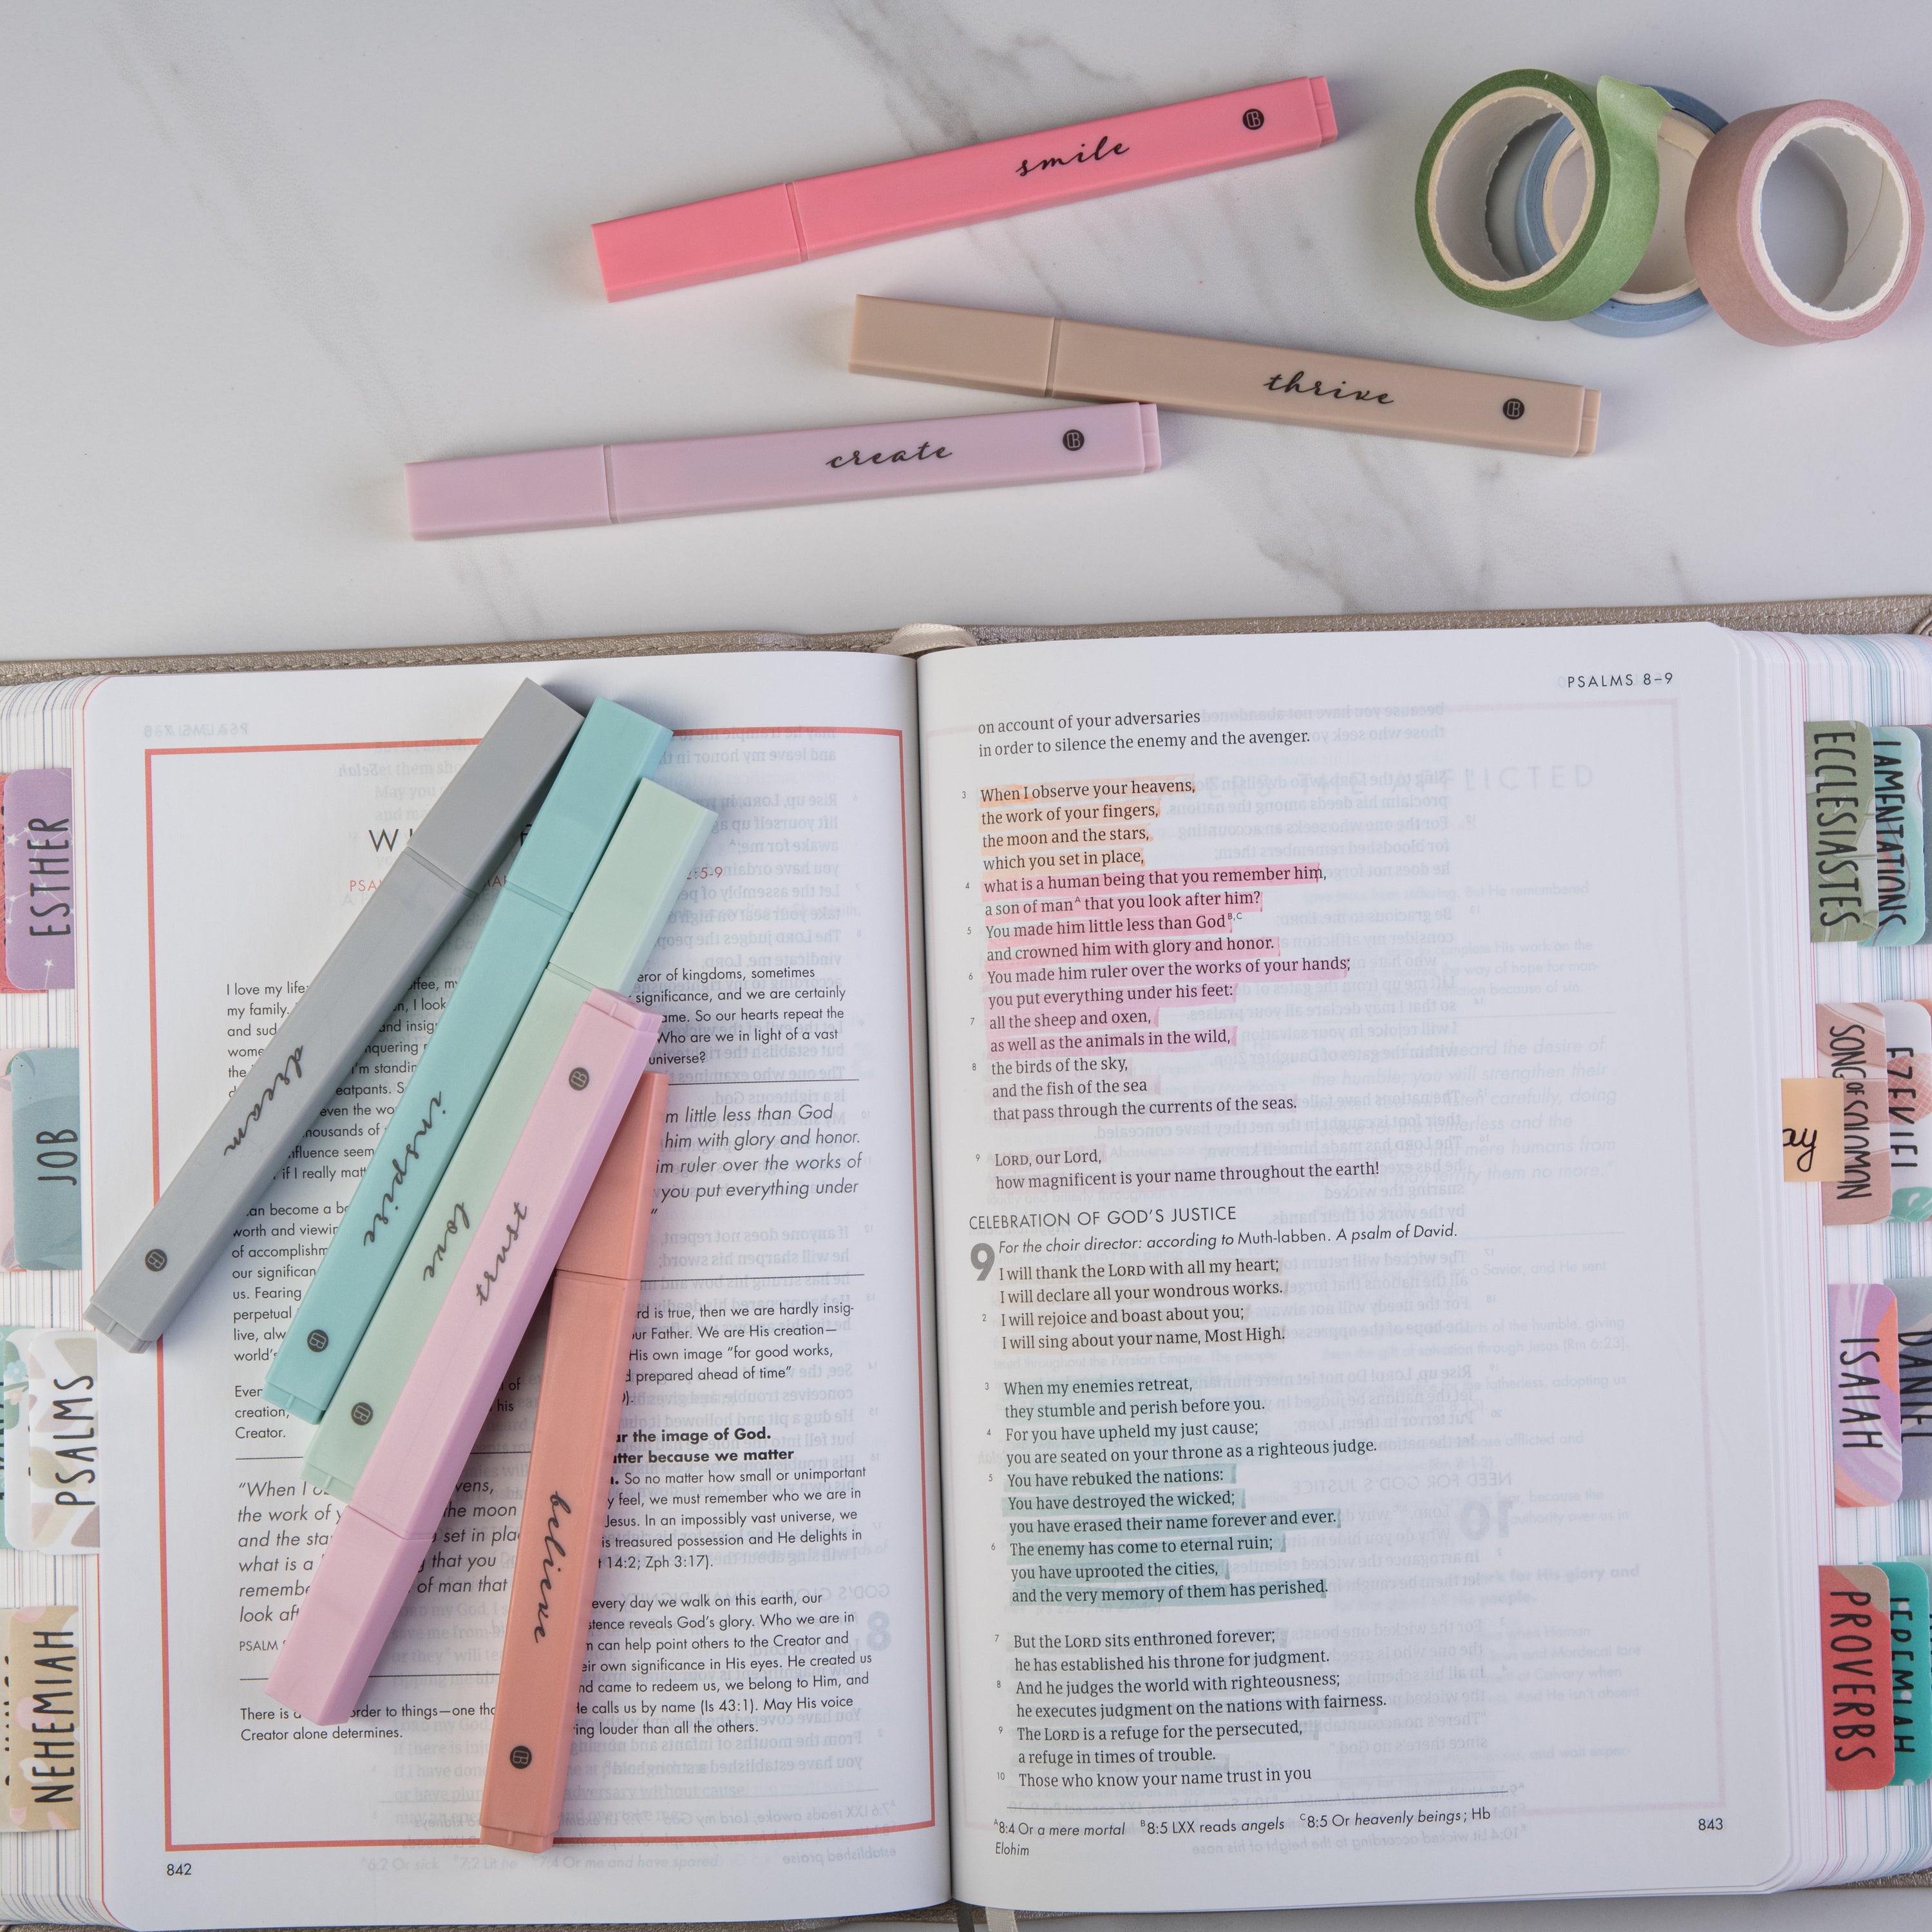 Bible Dry Highlighter Set by Spring Arbor